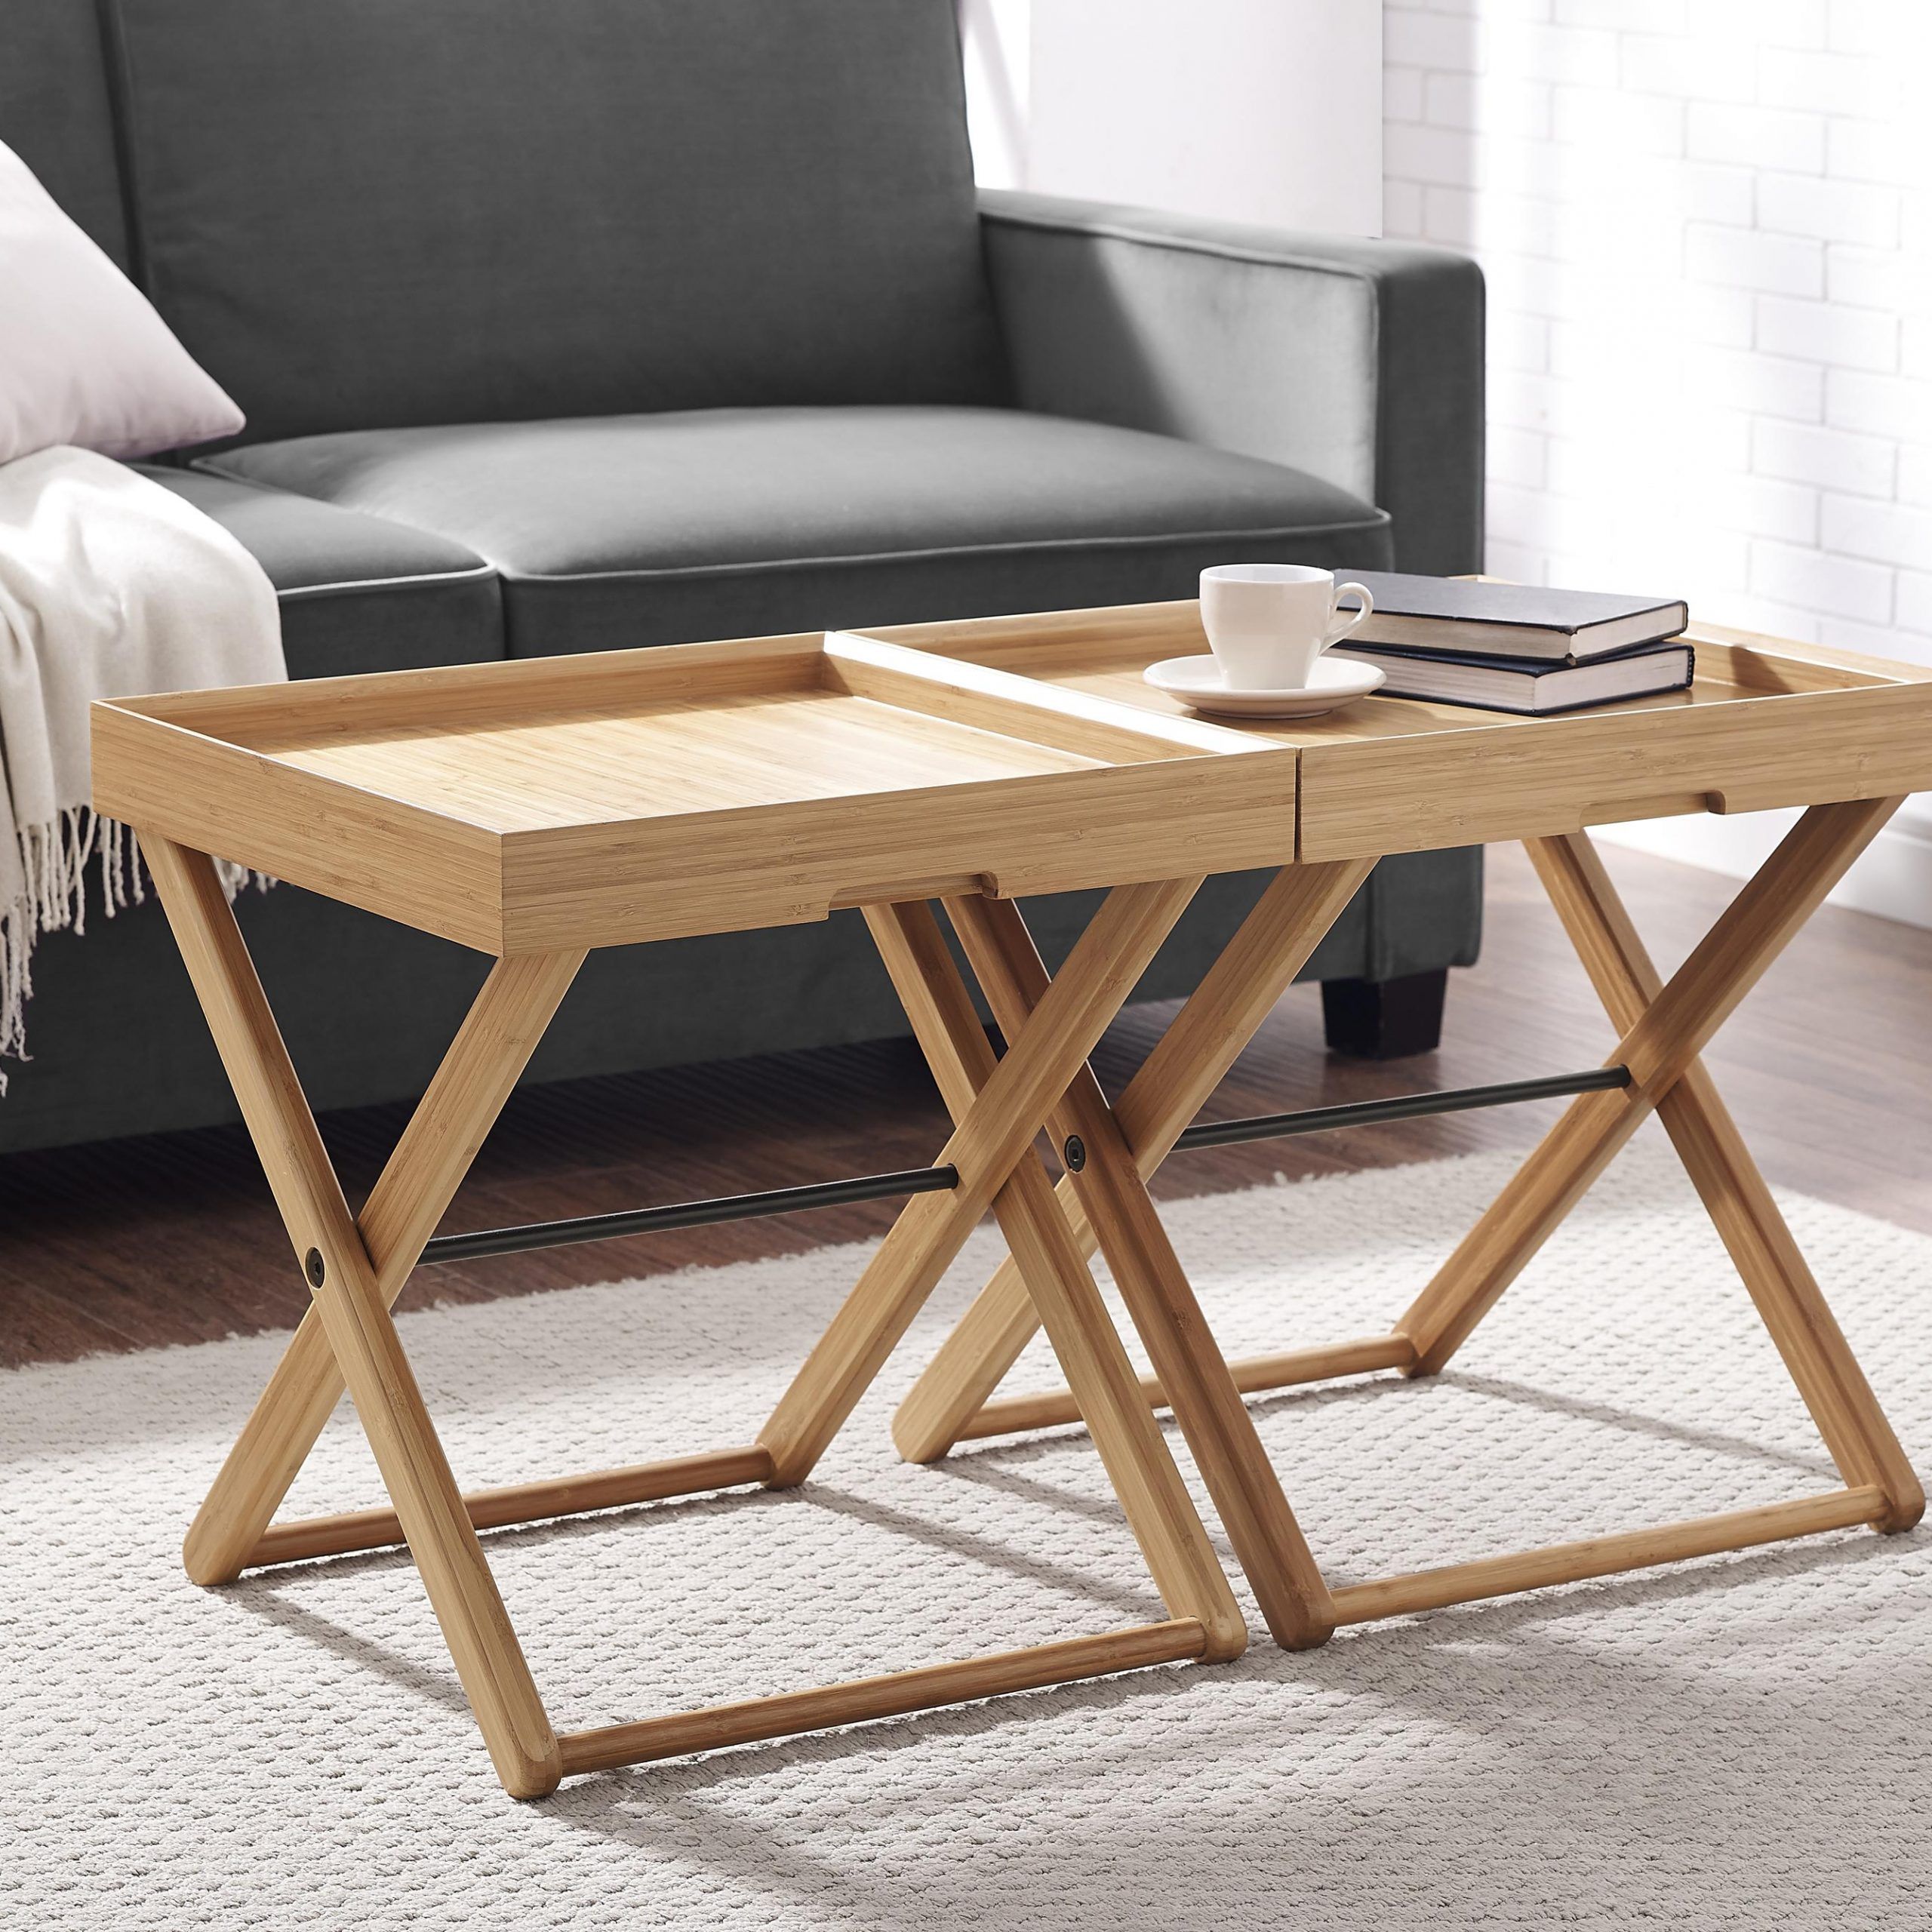 Bamboo Tray Table Caramelized Modern Telinegreenington (gt001ca) Pertaining To 2019 Caramalized Coffee Tables (View 9 of 20)